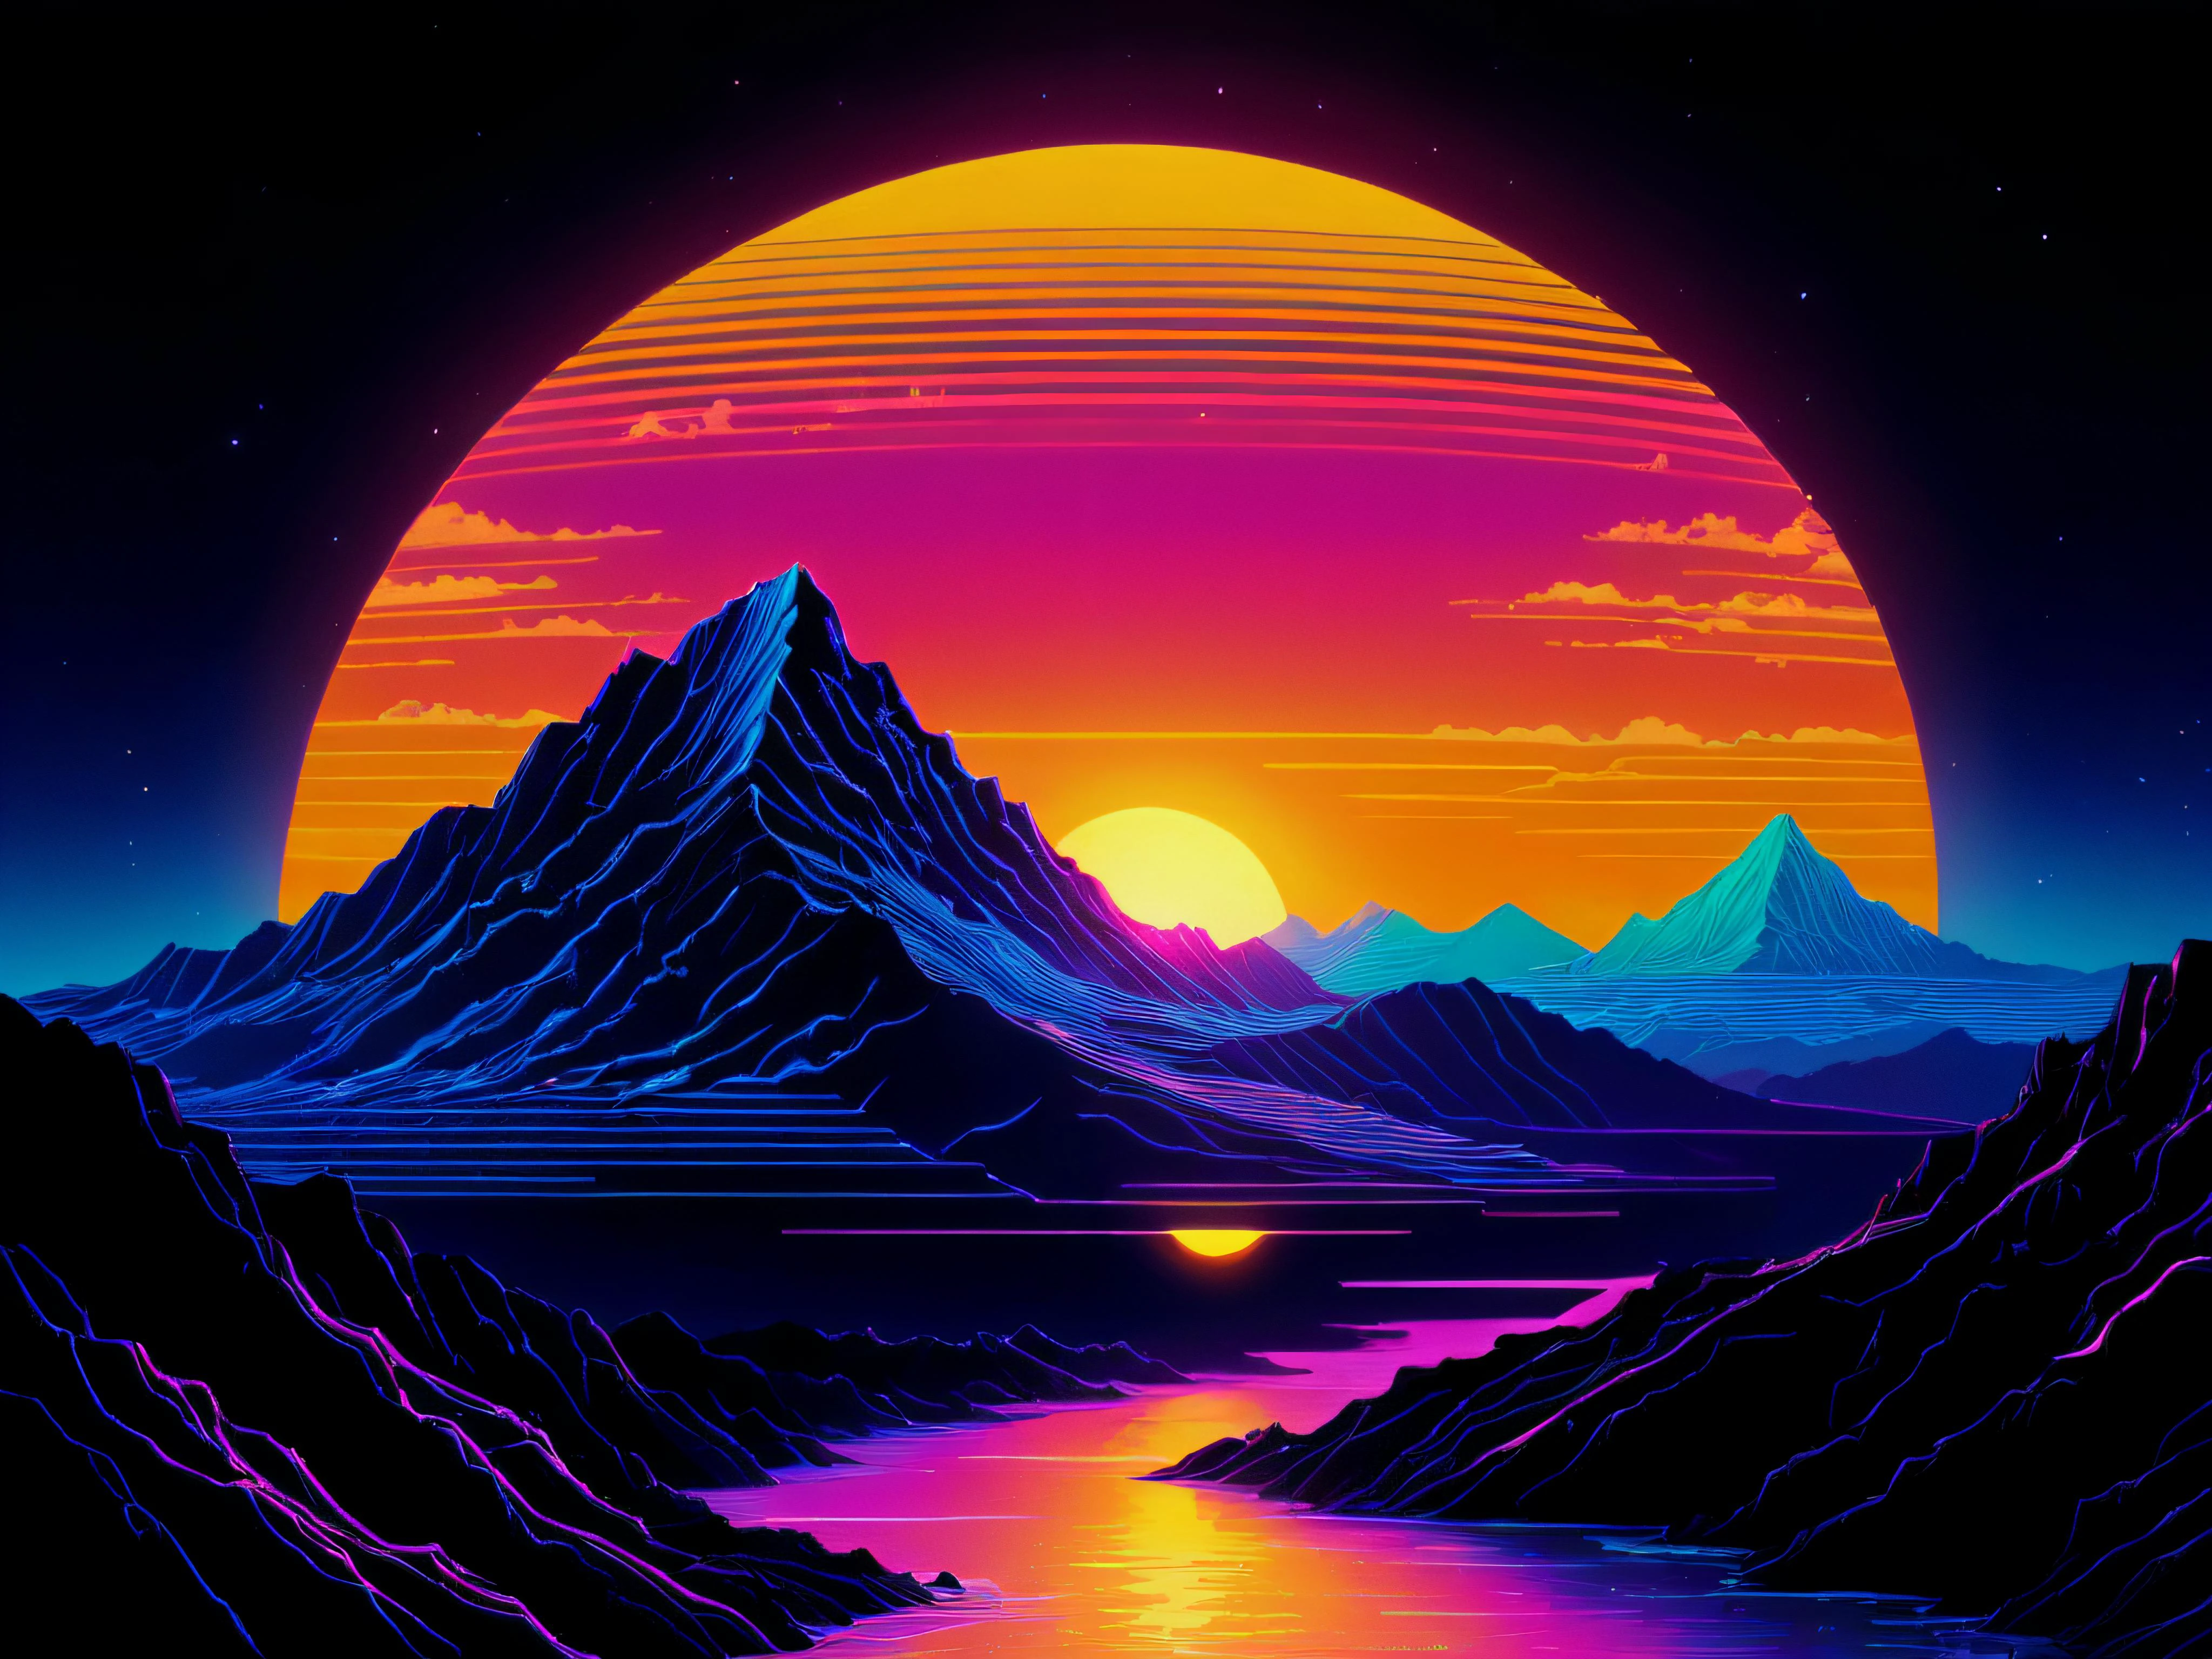 Retrowave
Retrowave Sun
Synthwave 8k
Vaporwave 4k, 4K, illustration, 1980s, digital art, glowing, sun rays, sunset, nature, colorful, artwork, landscape, lines, 7-RetroDigital, a psychedelic psychedelic psychedelic psychedelic psychedelic psychedelic psychedelic psychedelic psychedelic psychedelic psychedelic psychedelic psychedelic psychedelic psychedelic psychedelic psychedelic psychedelic psychedelic psychedelic, retrowave palette, a retropunk naturewave defender, mountains and colorful sunset!!, inspired by David A Hardy, pink and blue gradients, background bar